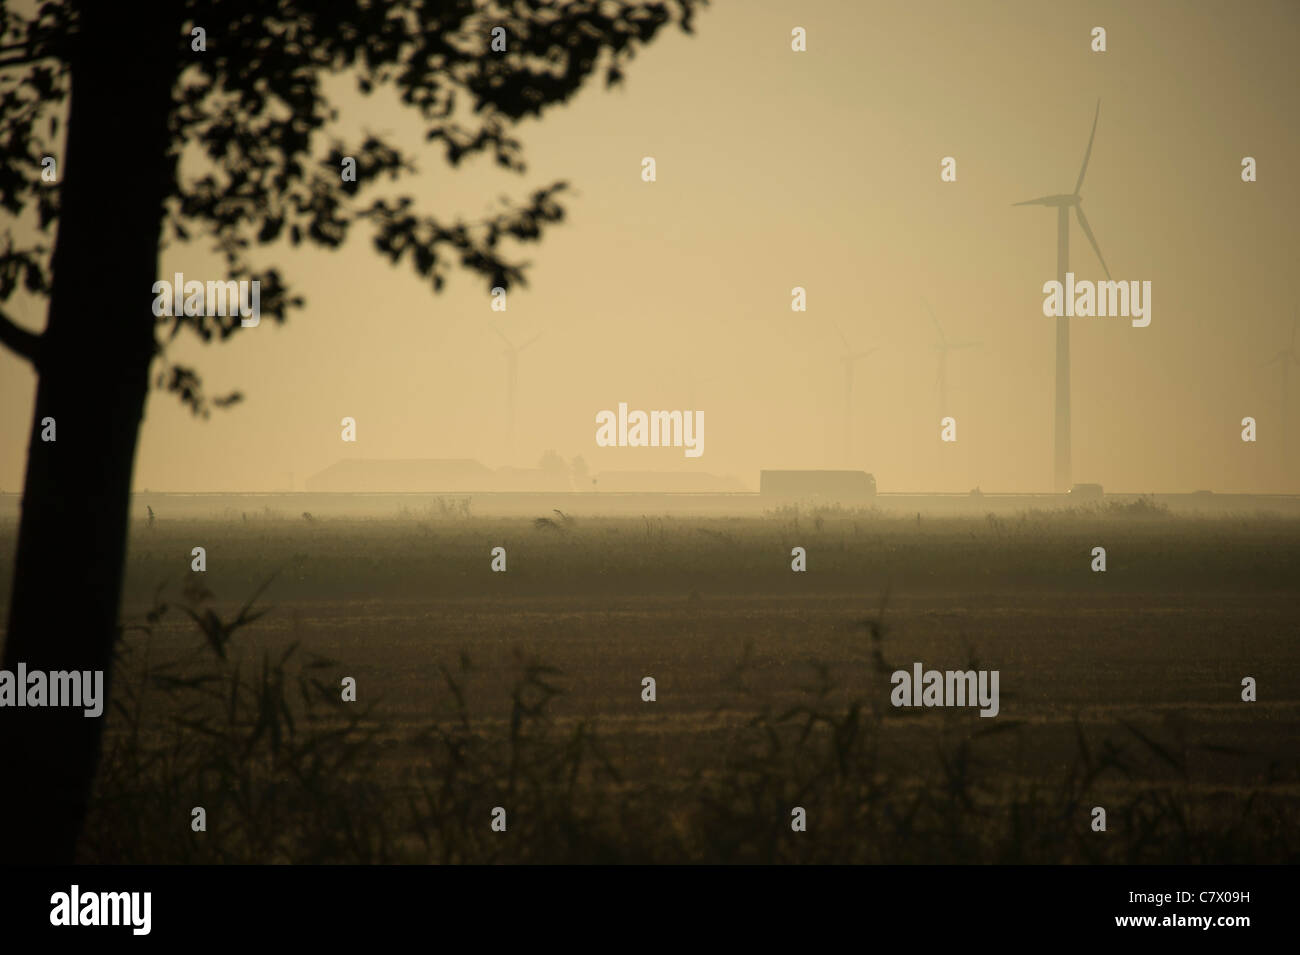 Silhouette of wind turbine in early morning Stock Photo